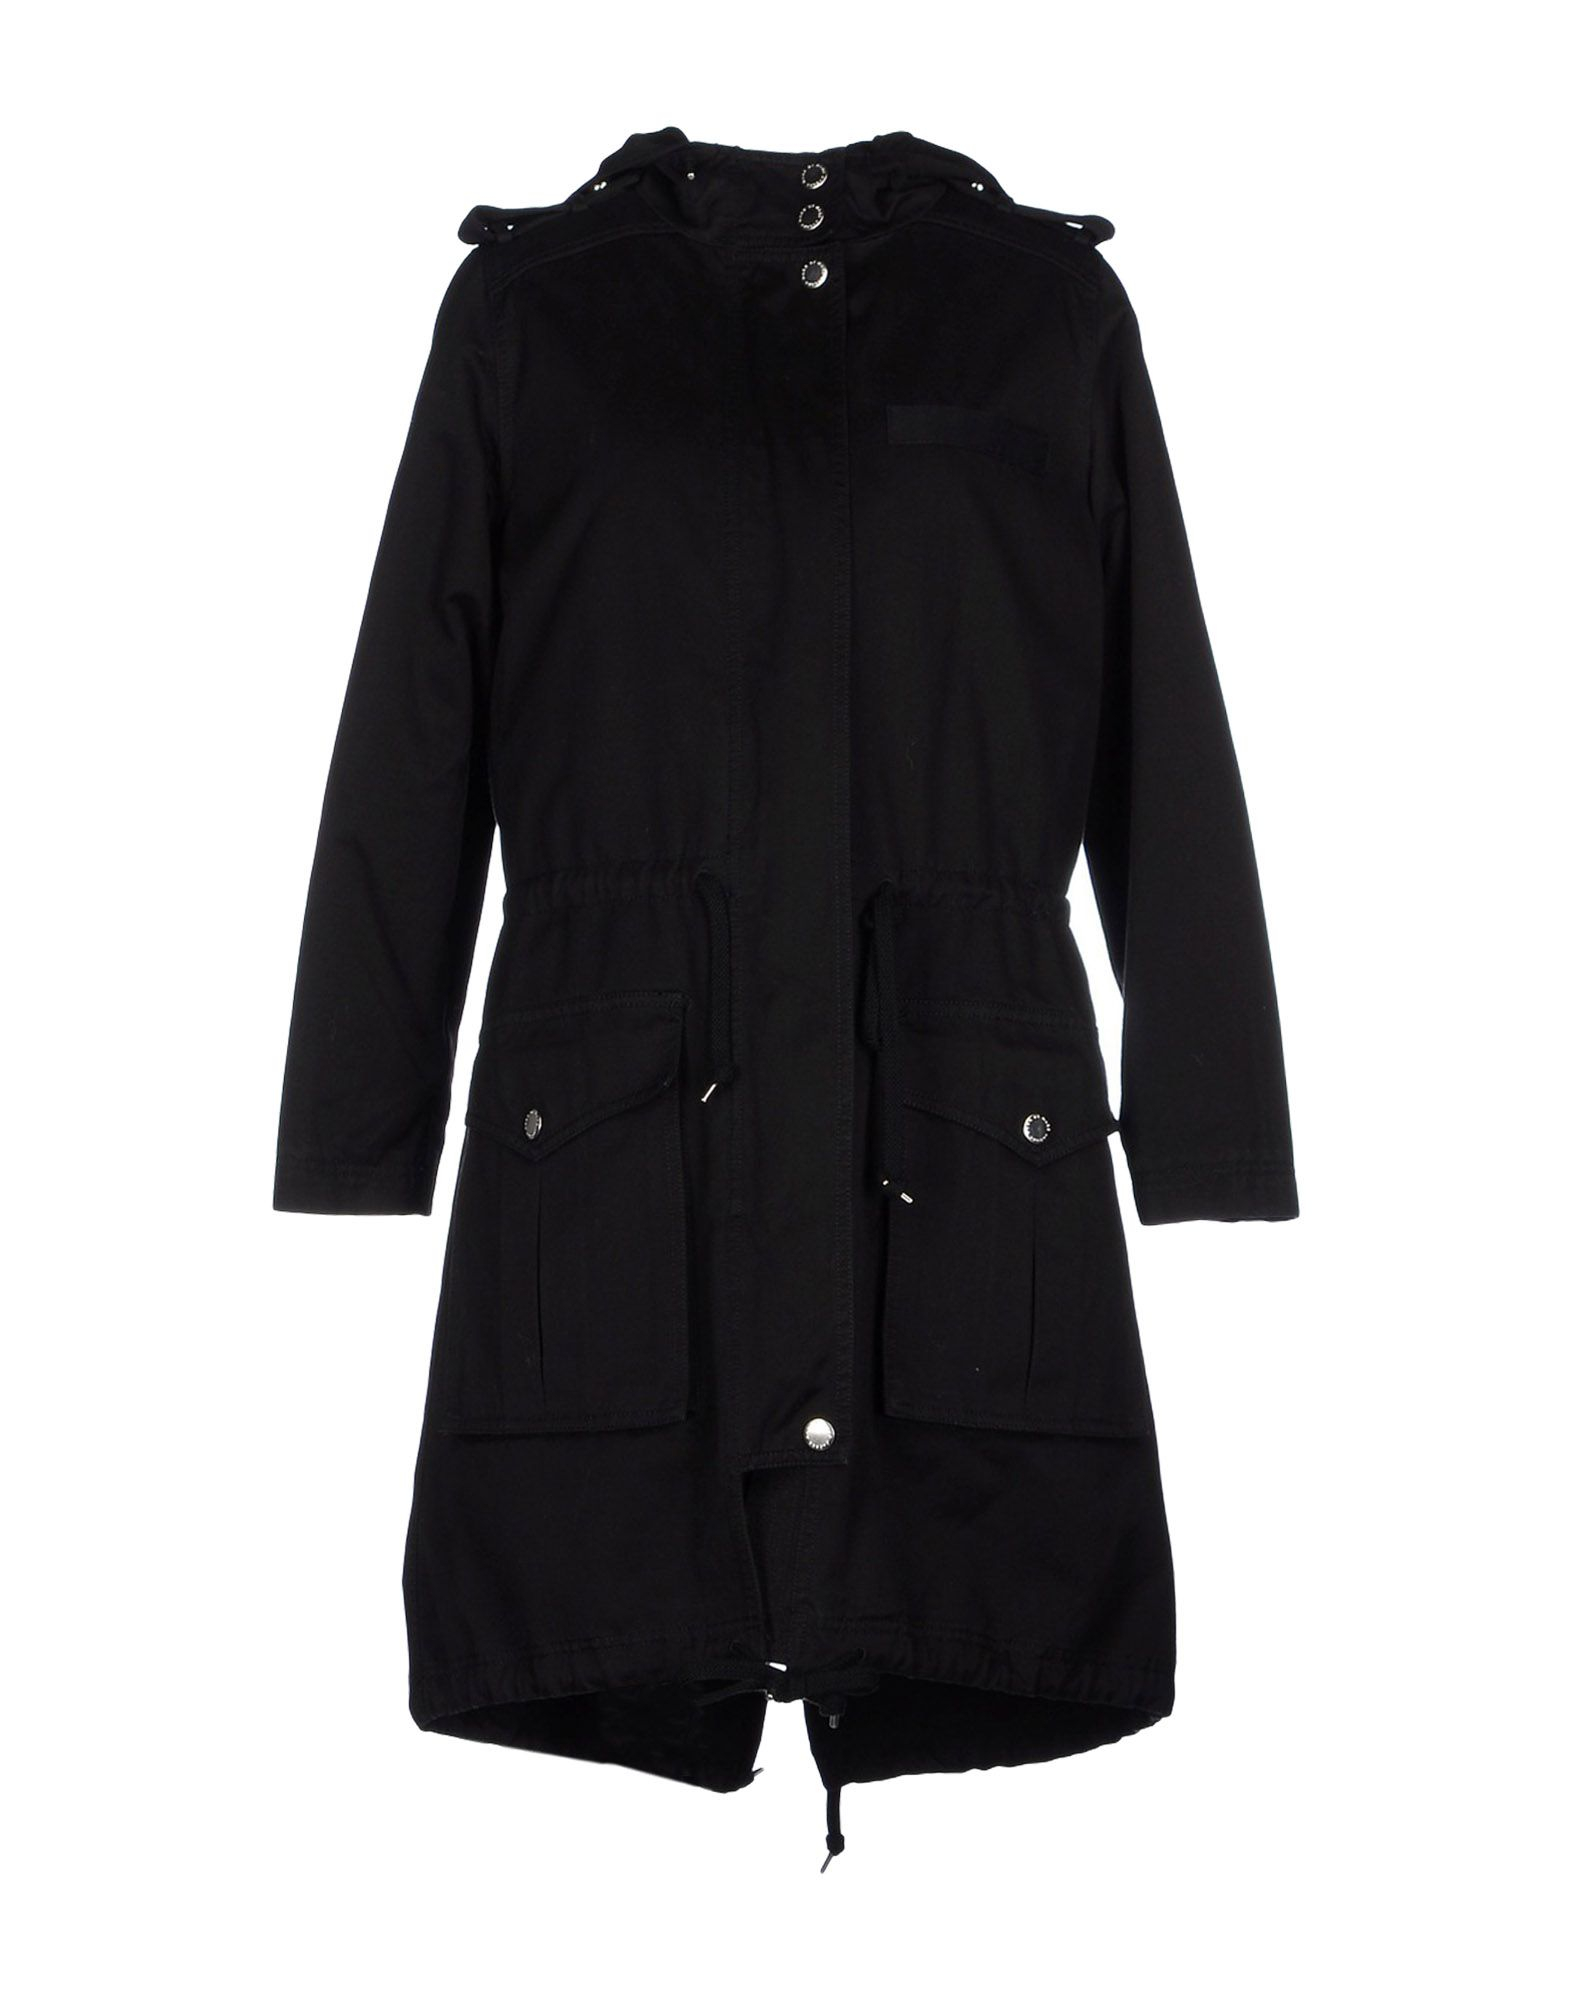 Lyst - Marc By Marc Jacobs Jacket in Black